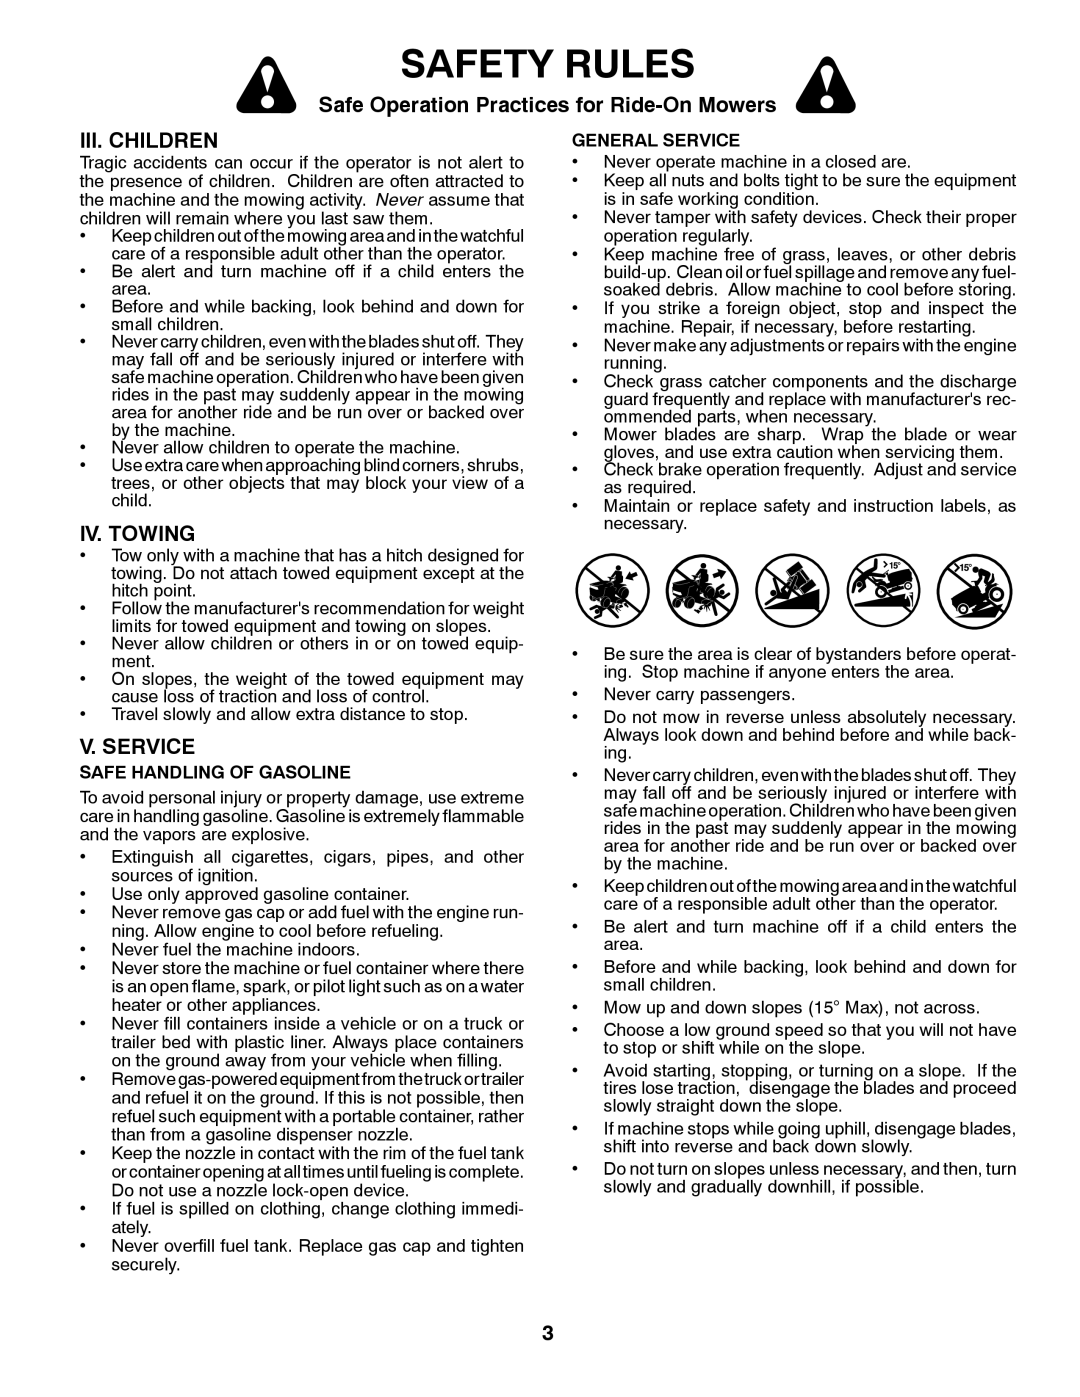 Poulan PK20H42YT manual Iii. Children, Iv. Towing, V. Service, Safety Rules, Safe Operation Practices for Ride-OnMowers 